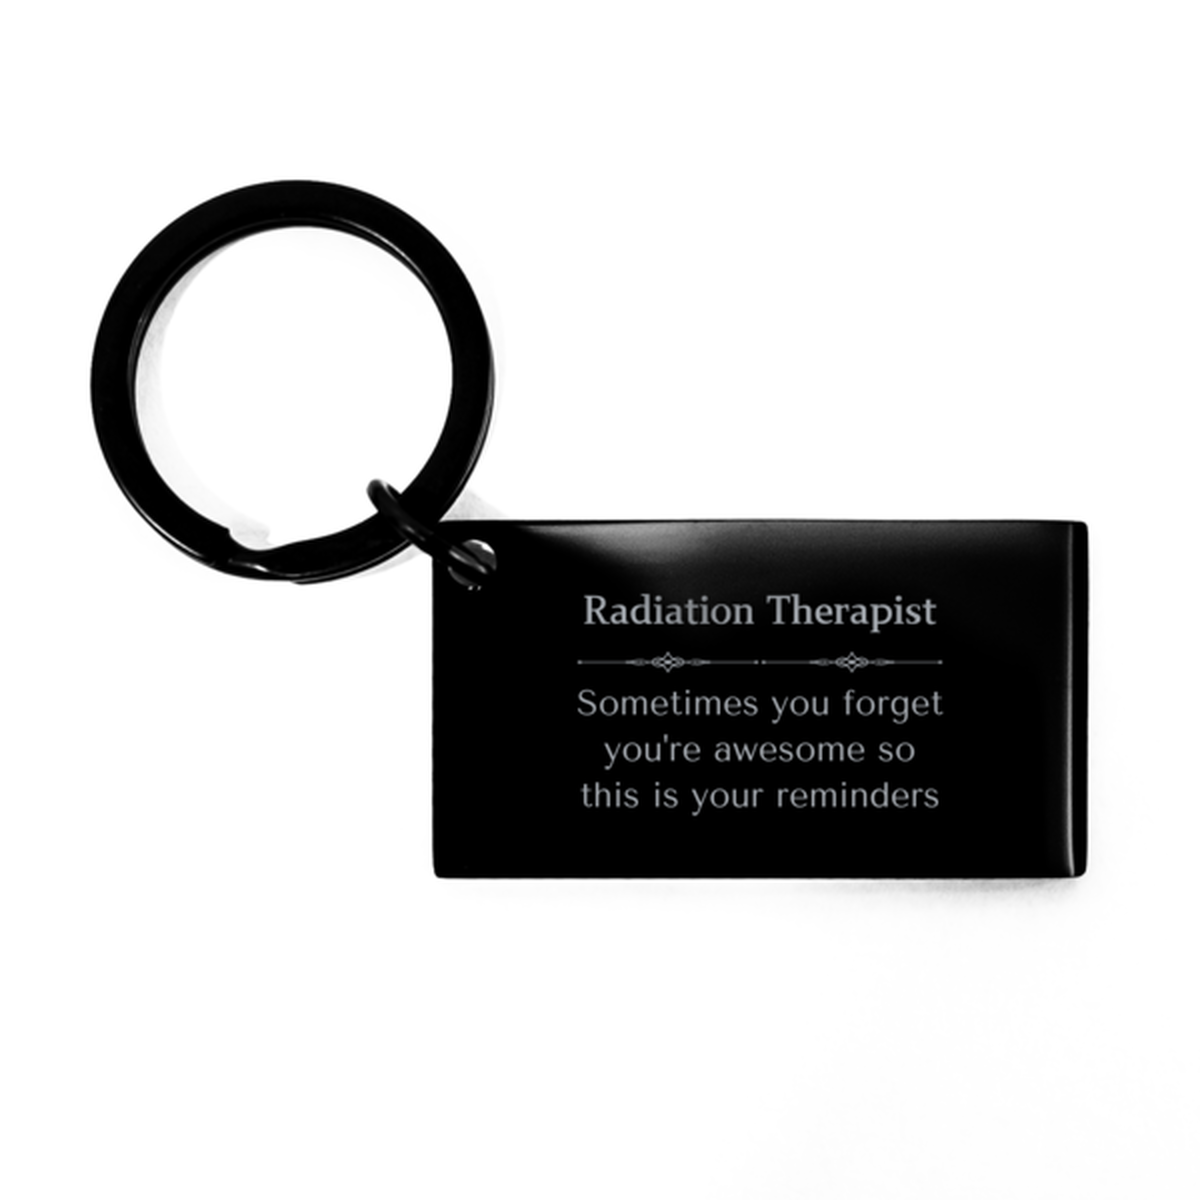 Sentimental Radiation Therapist Keychain, Supervisor Sometimes you forget you're awesome so this is your reminders, Graduation Christmas Birthday Gifts for Radiation Therapist, Men, Women, Coworkers